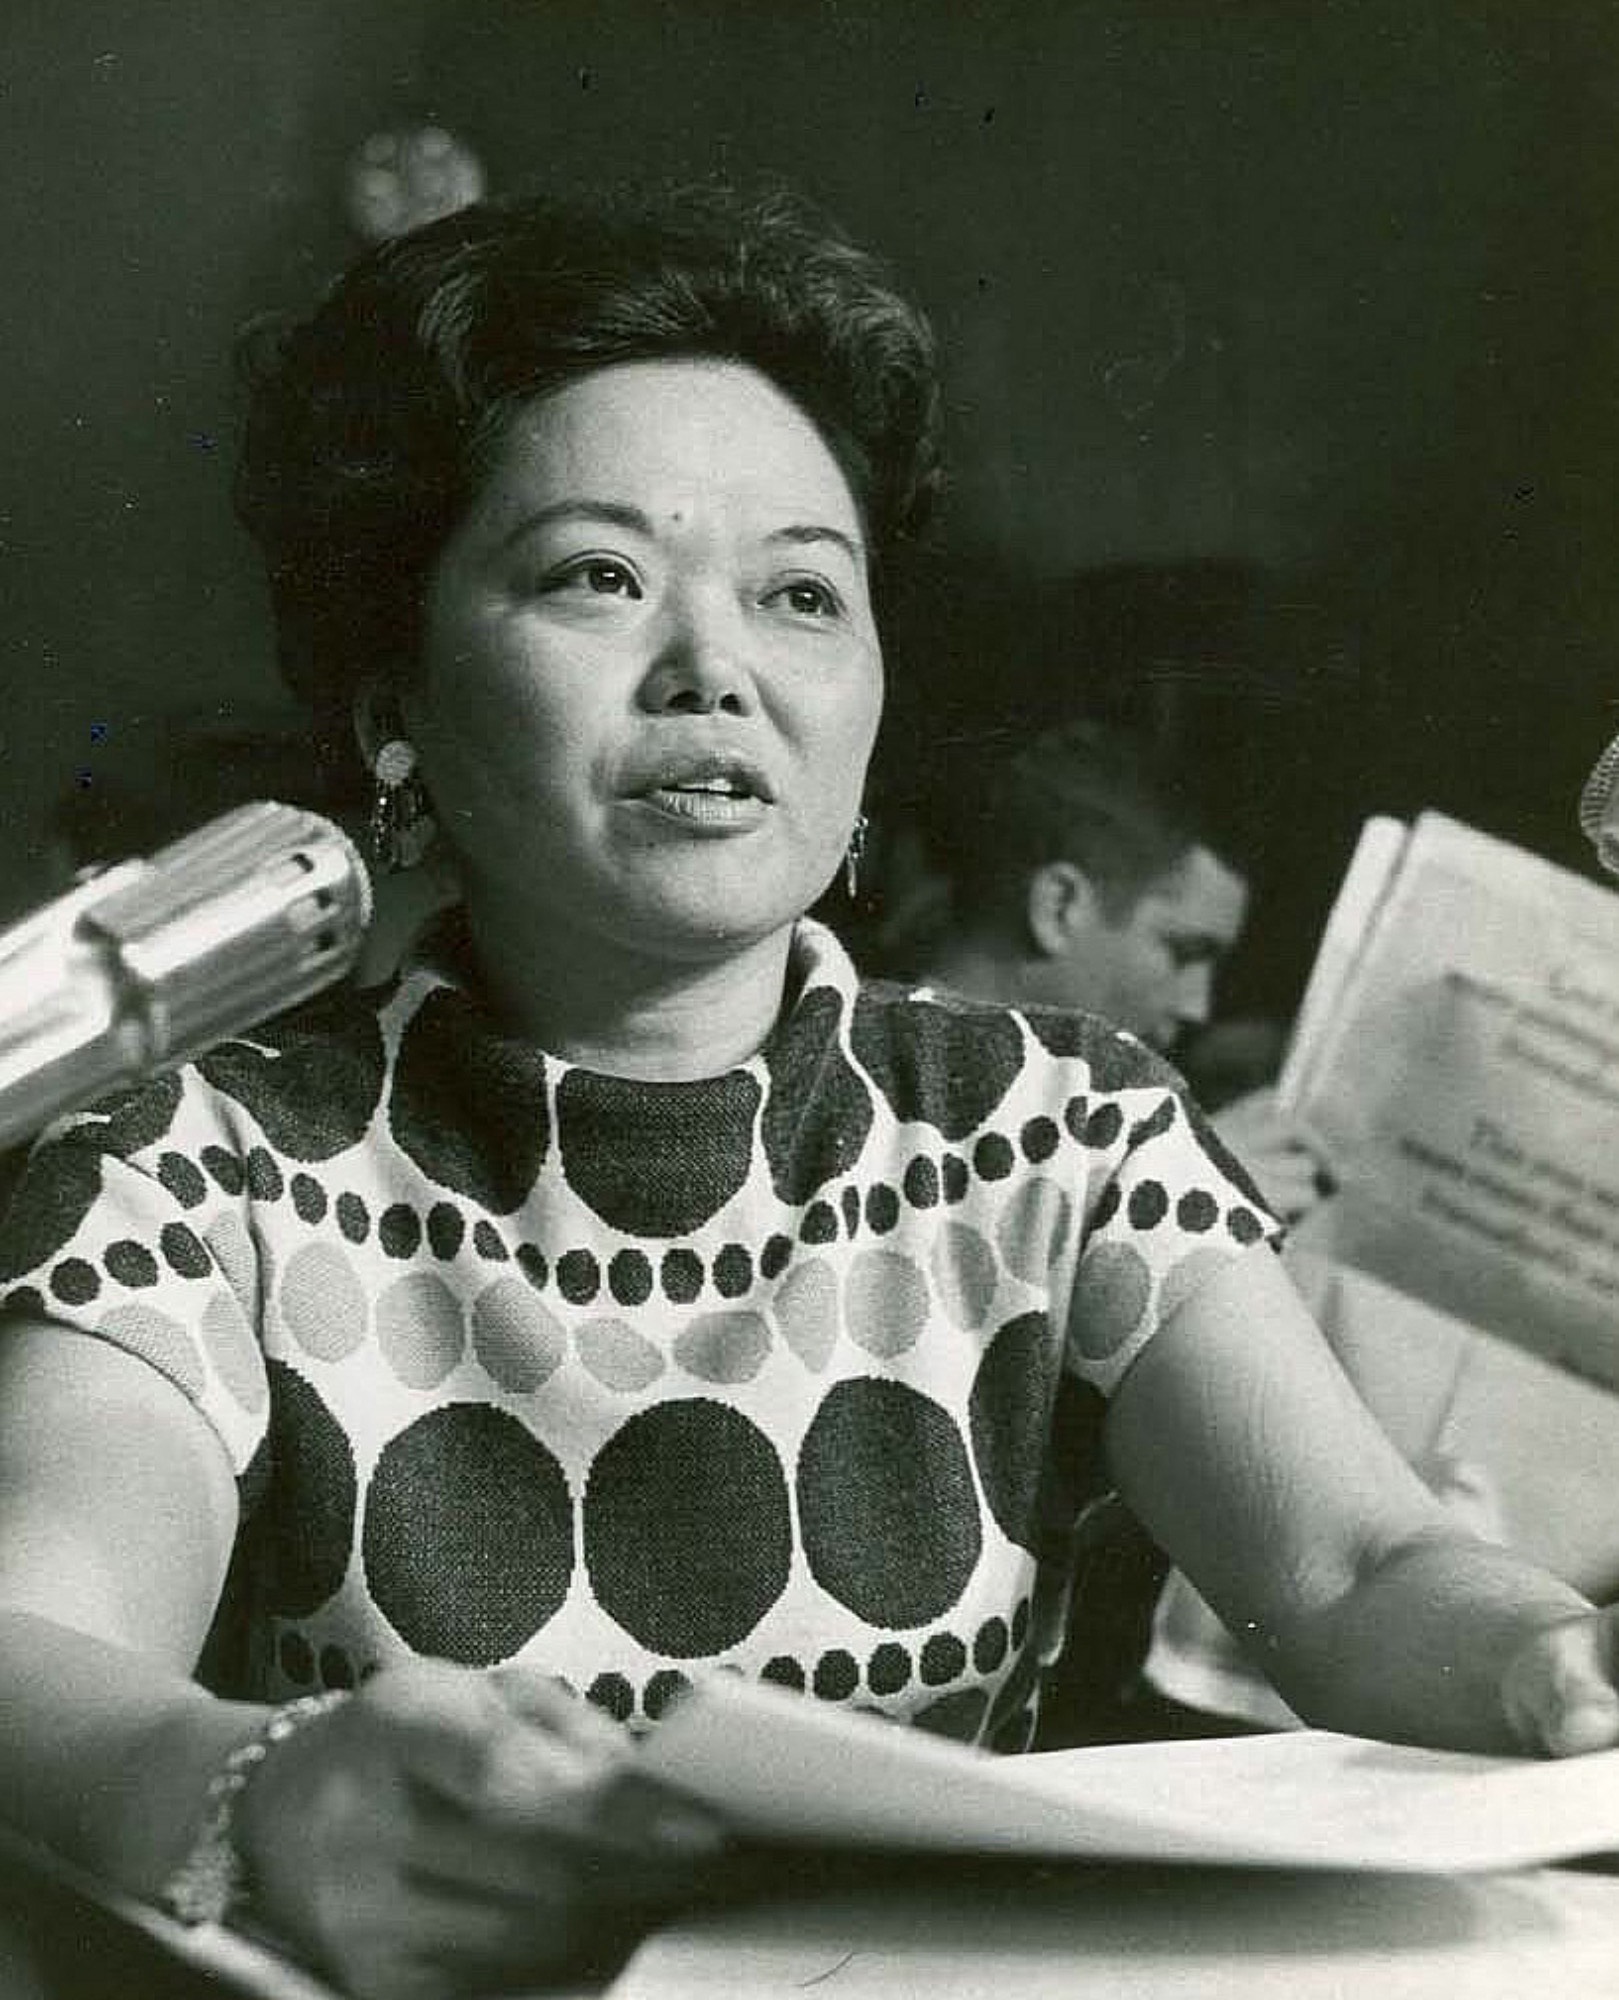 Patsy Mink wearing polka dot top offering the first feminist critique of a supreme court nominee in testimony before the Senate Judiciary Committee, winter 1970.